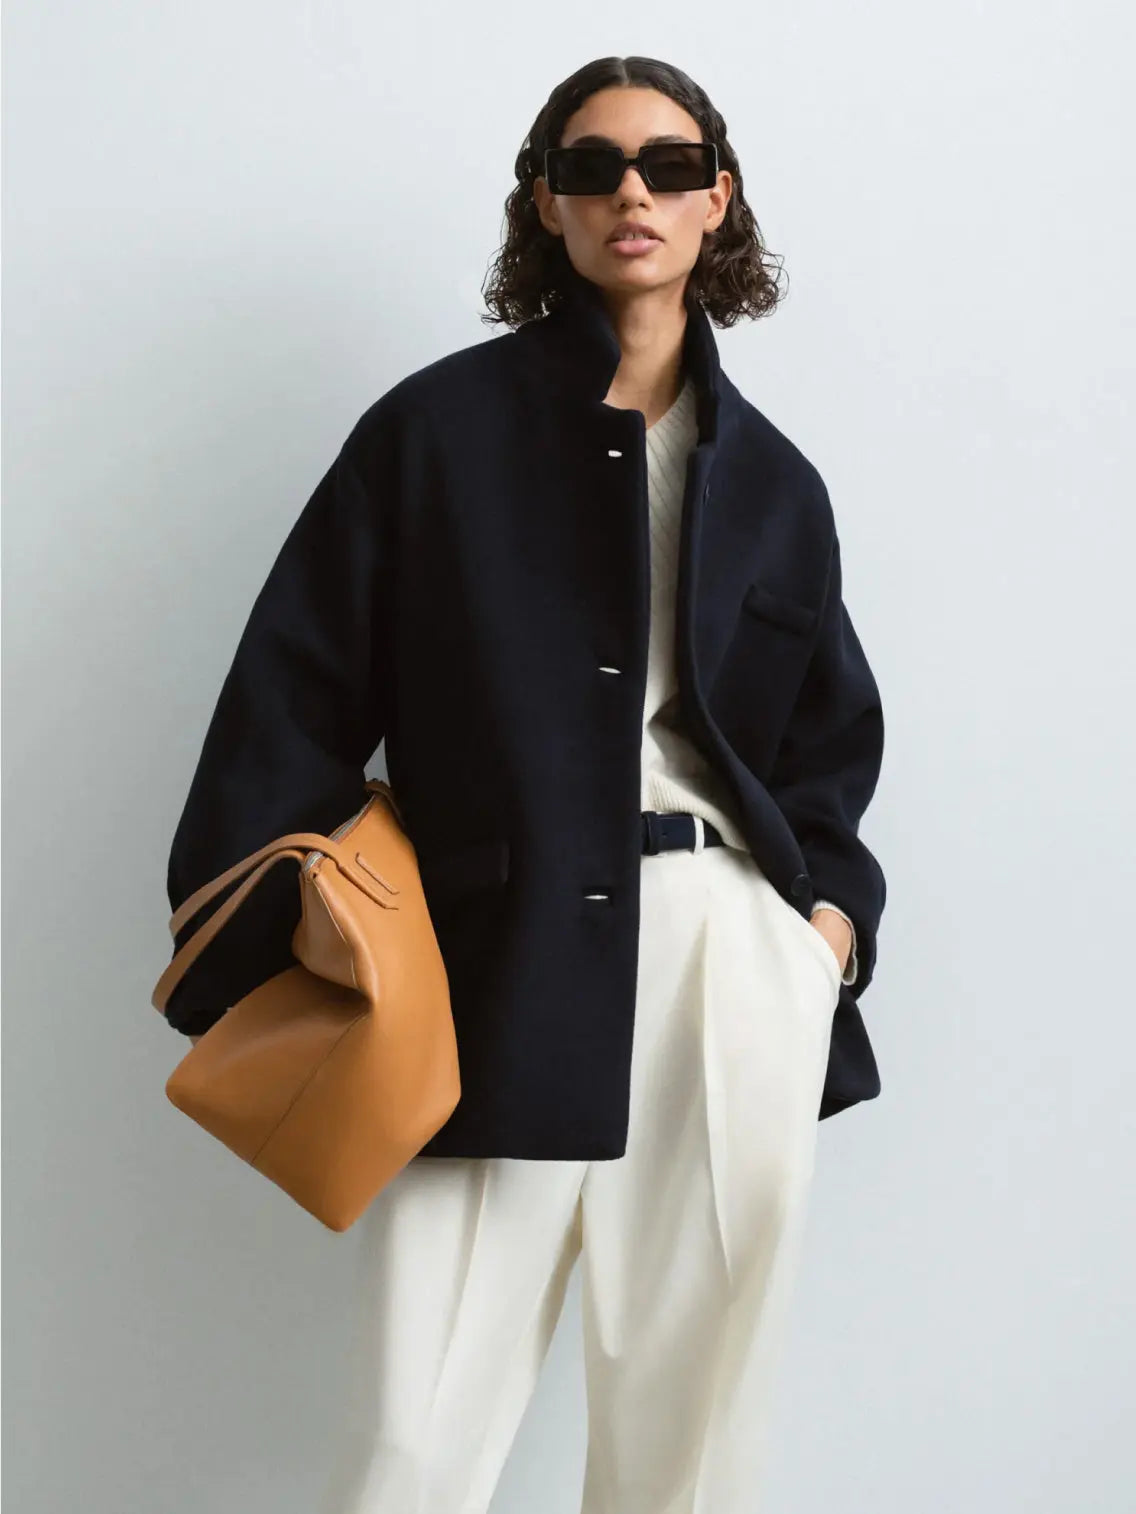 A person with shoulder-length curly hair wears dark sunglasses, a Wool Coat Navy by Cordera, and white pants. They hold a large tan handbag in one hand, exuding a relaxed, confident stance as if they just stepped out of a trendy Barcelona store against a plain background.